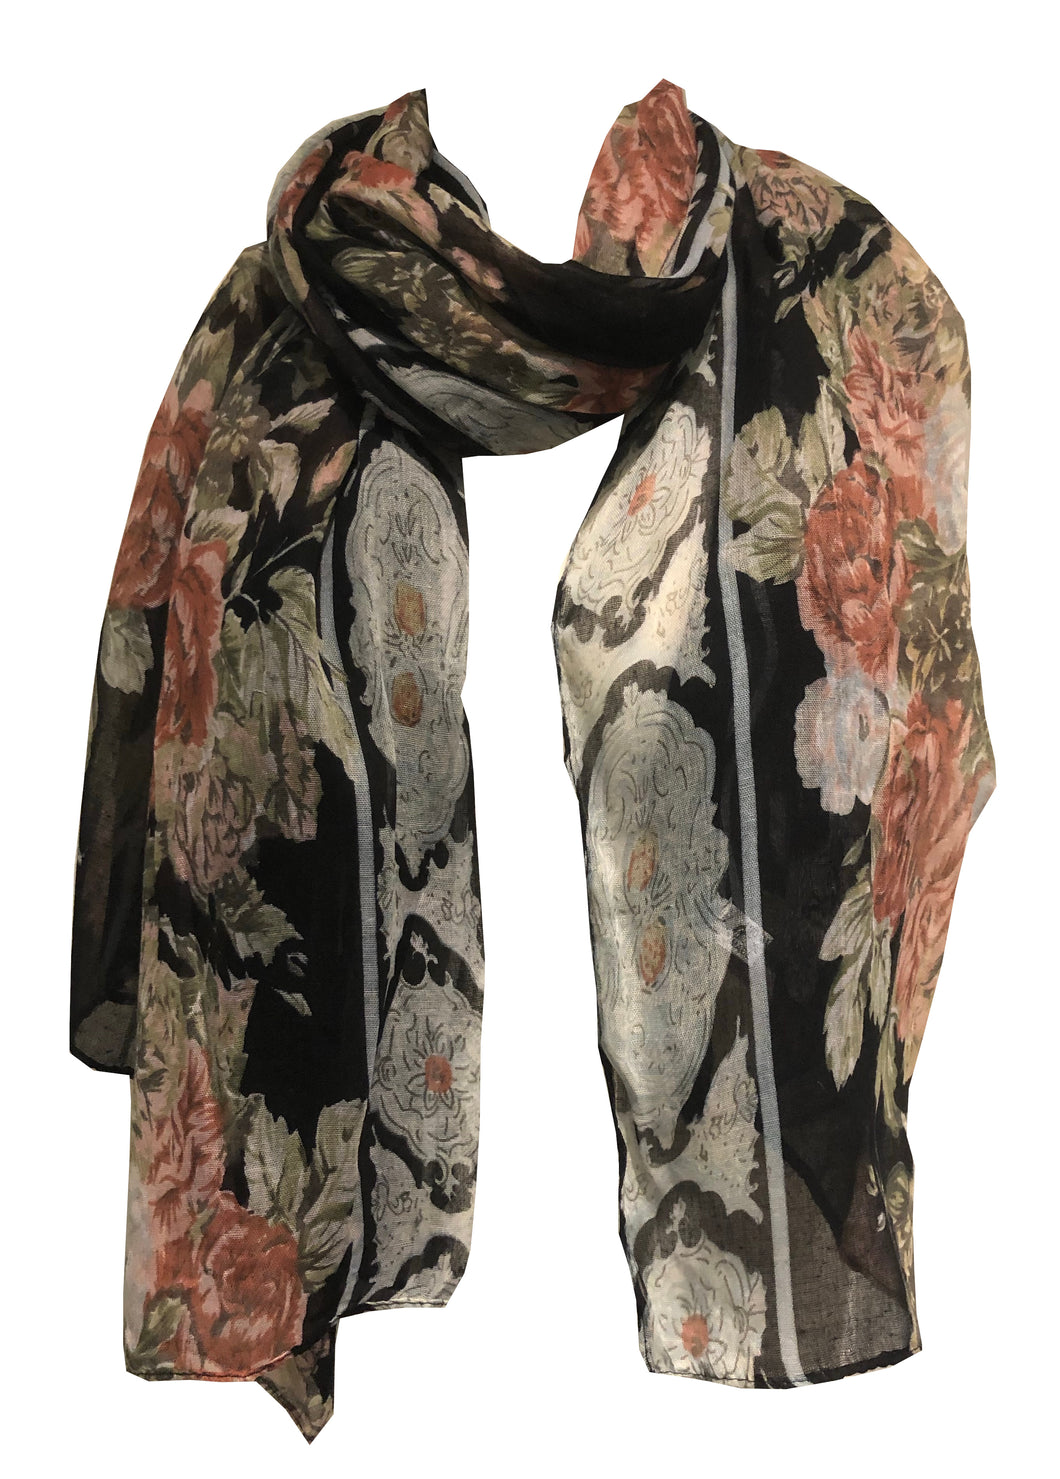 Pamper Yourself Now Black Eiffel Tower with Flower Design Scarf. Lovely Long Soft Scarf Fantastic Gift